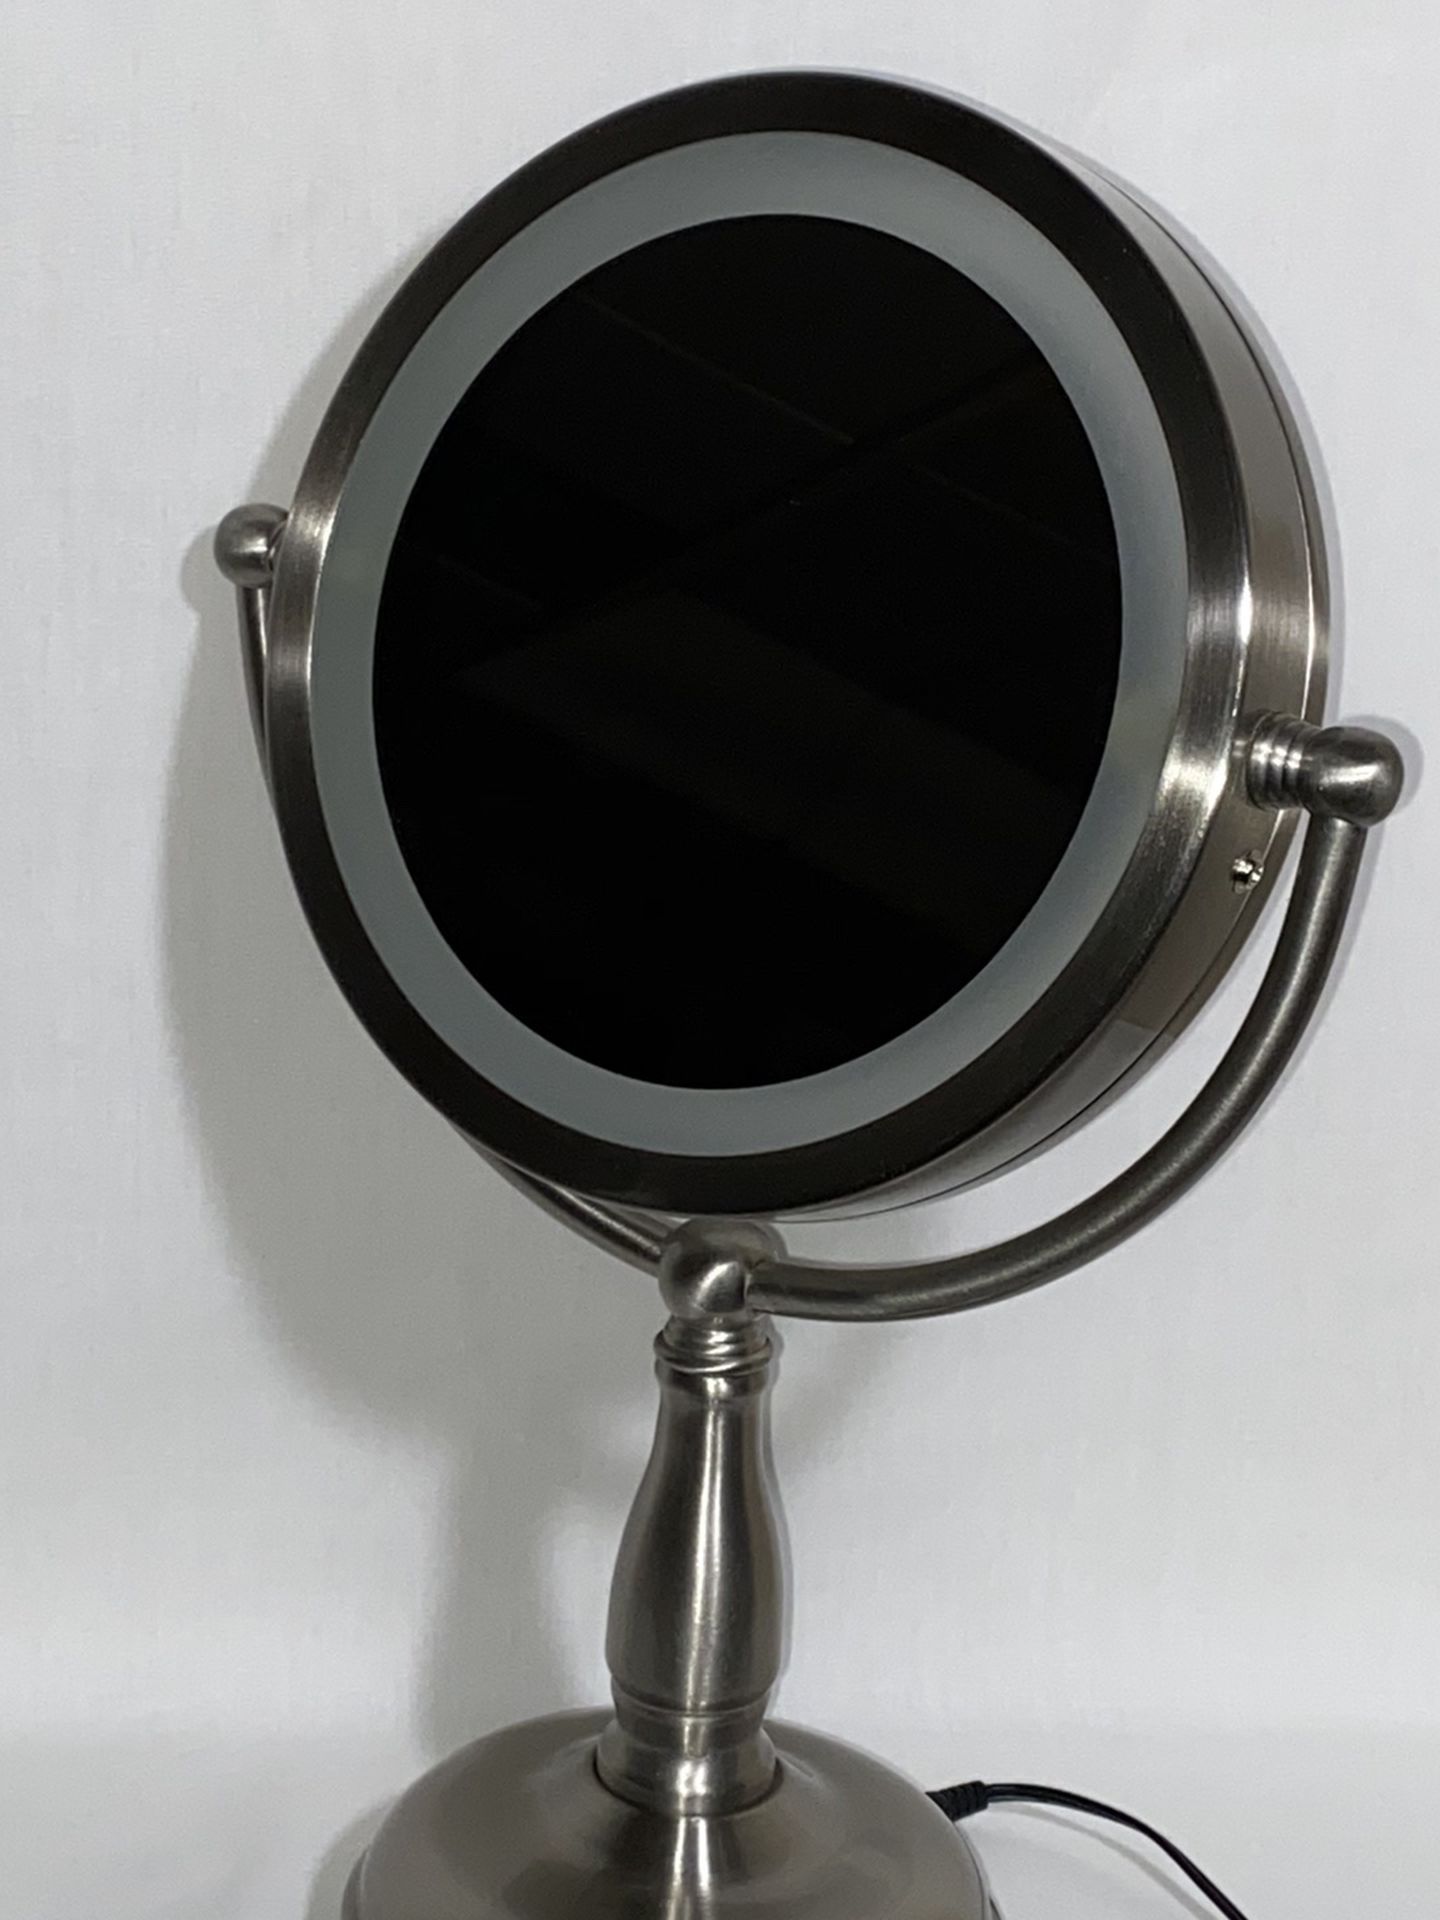 LED Vanity Makeup Mirror Great For Bathroom Use